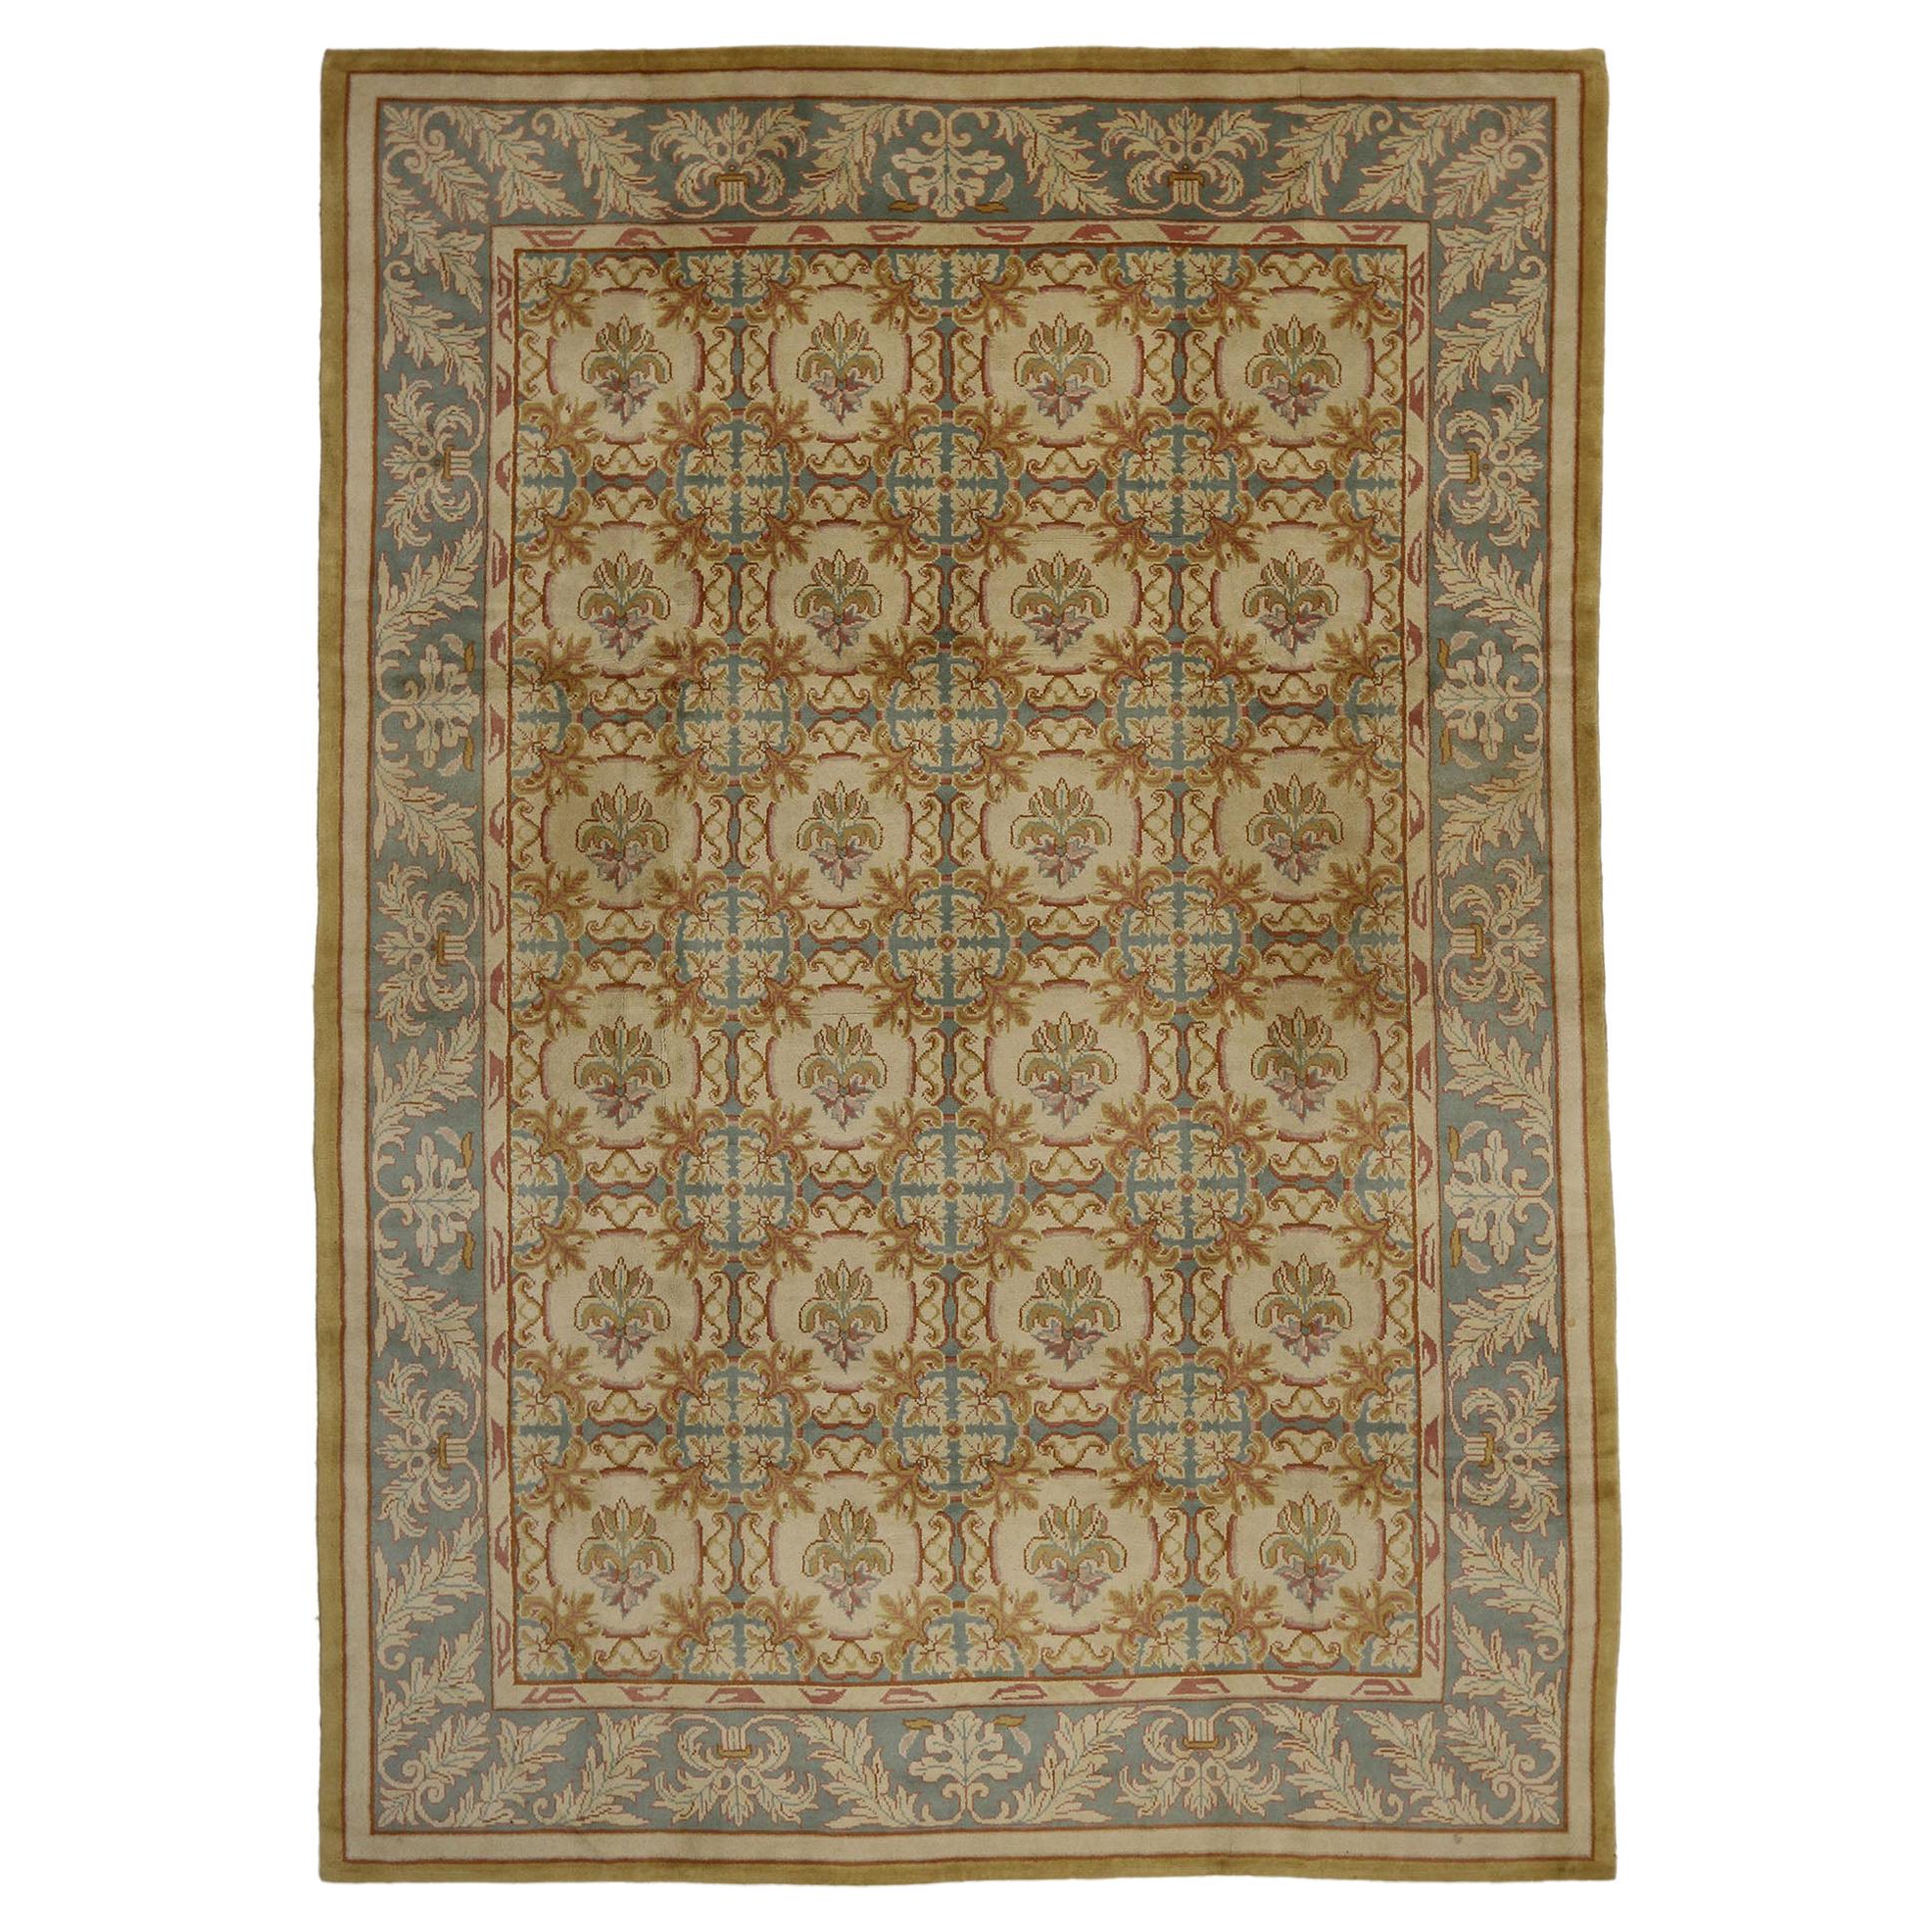 Vintage Turkish Oushak Rug with Neoclassical European Style and Soft Colors